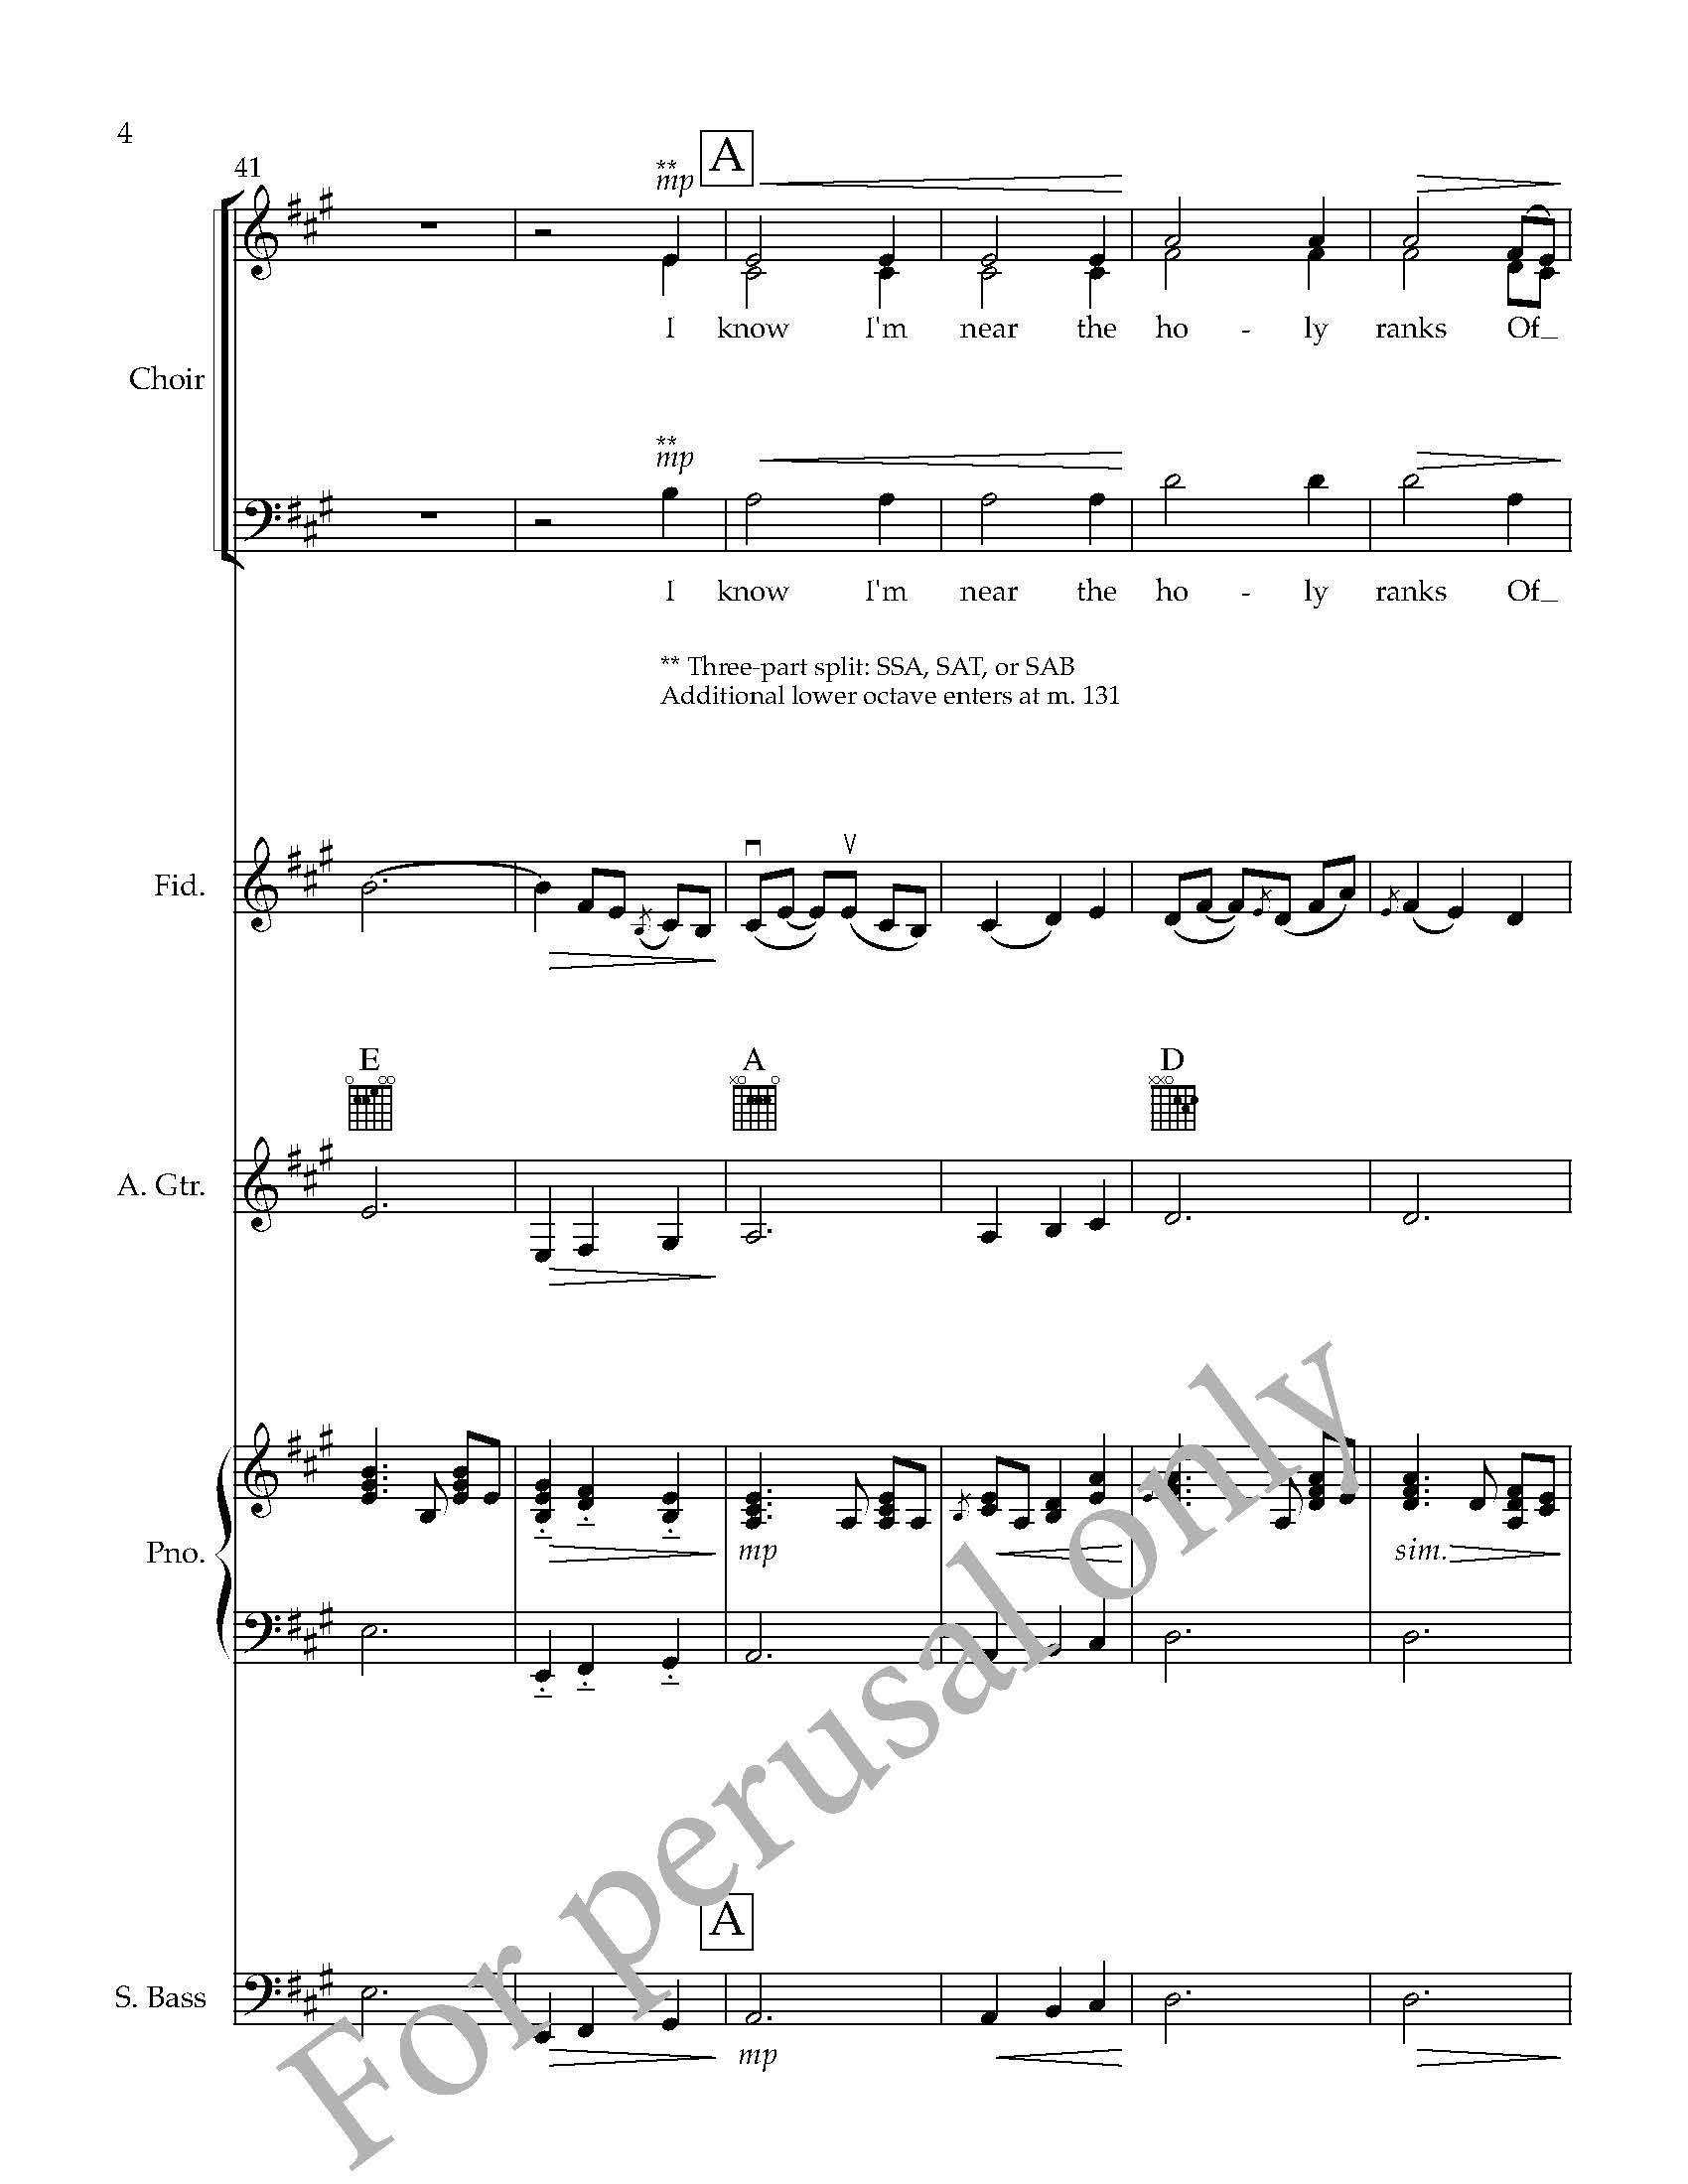 FULL SCORE preview - Angel Band for choir, fiddle, piano, guitar, and bass - arr_Page_04.jpg